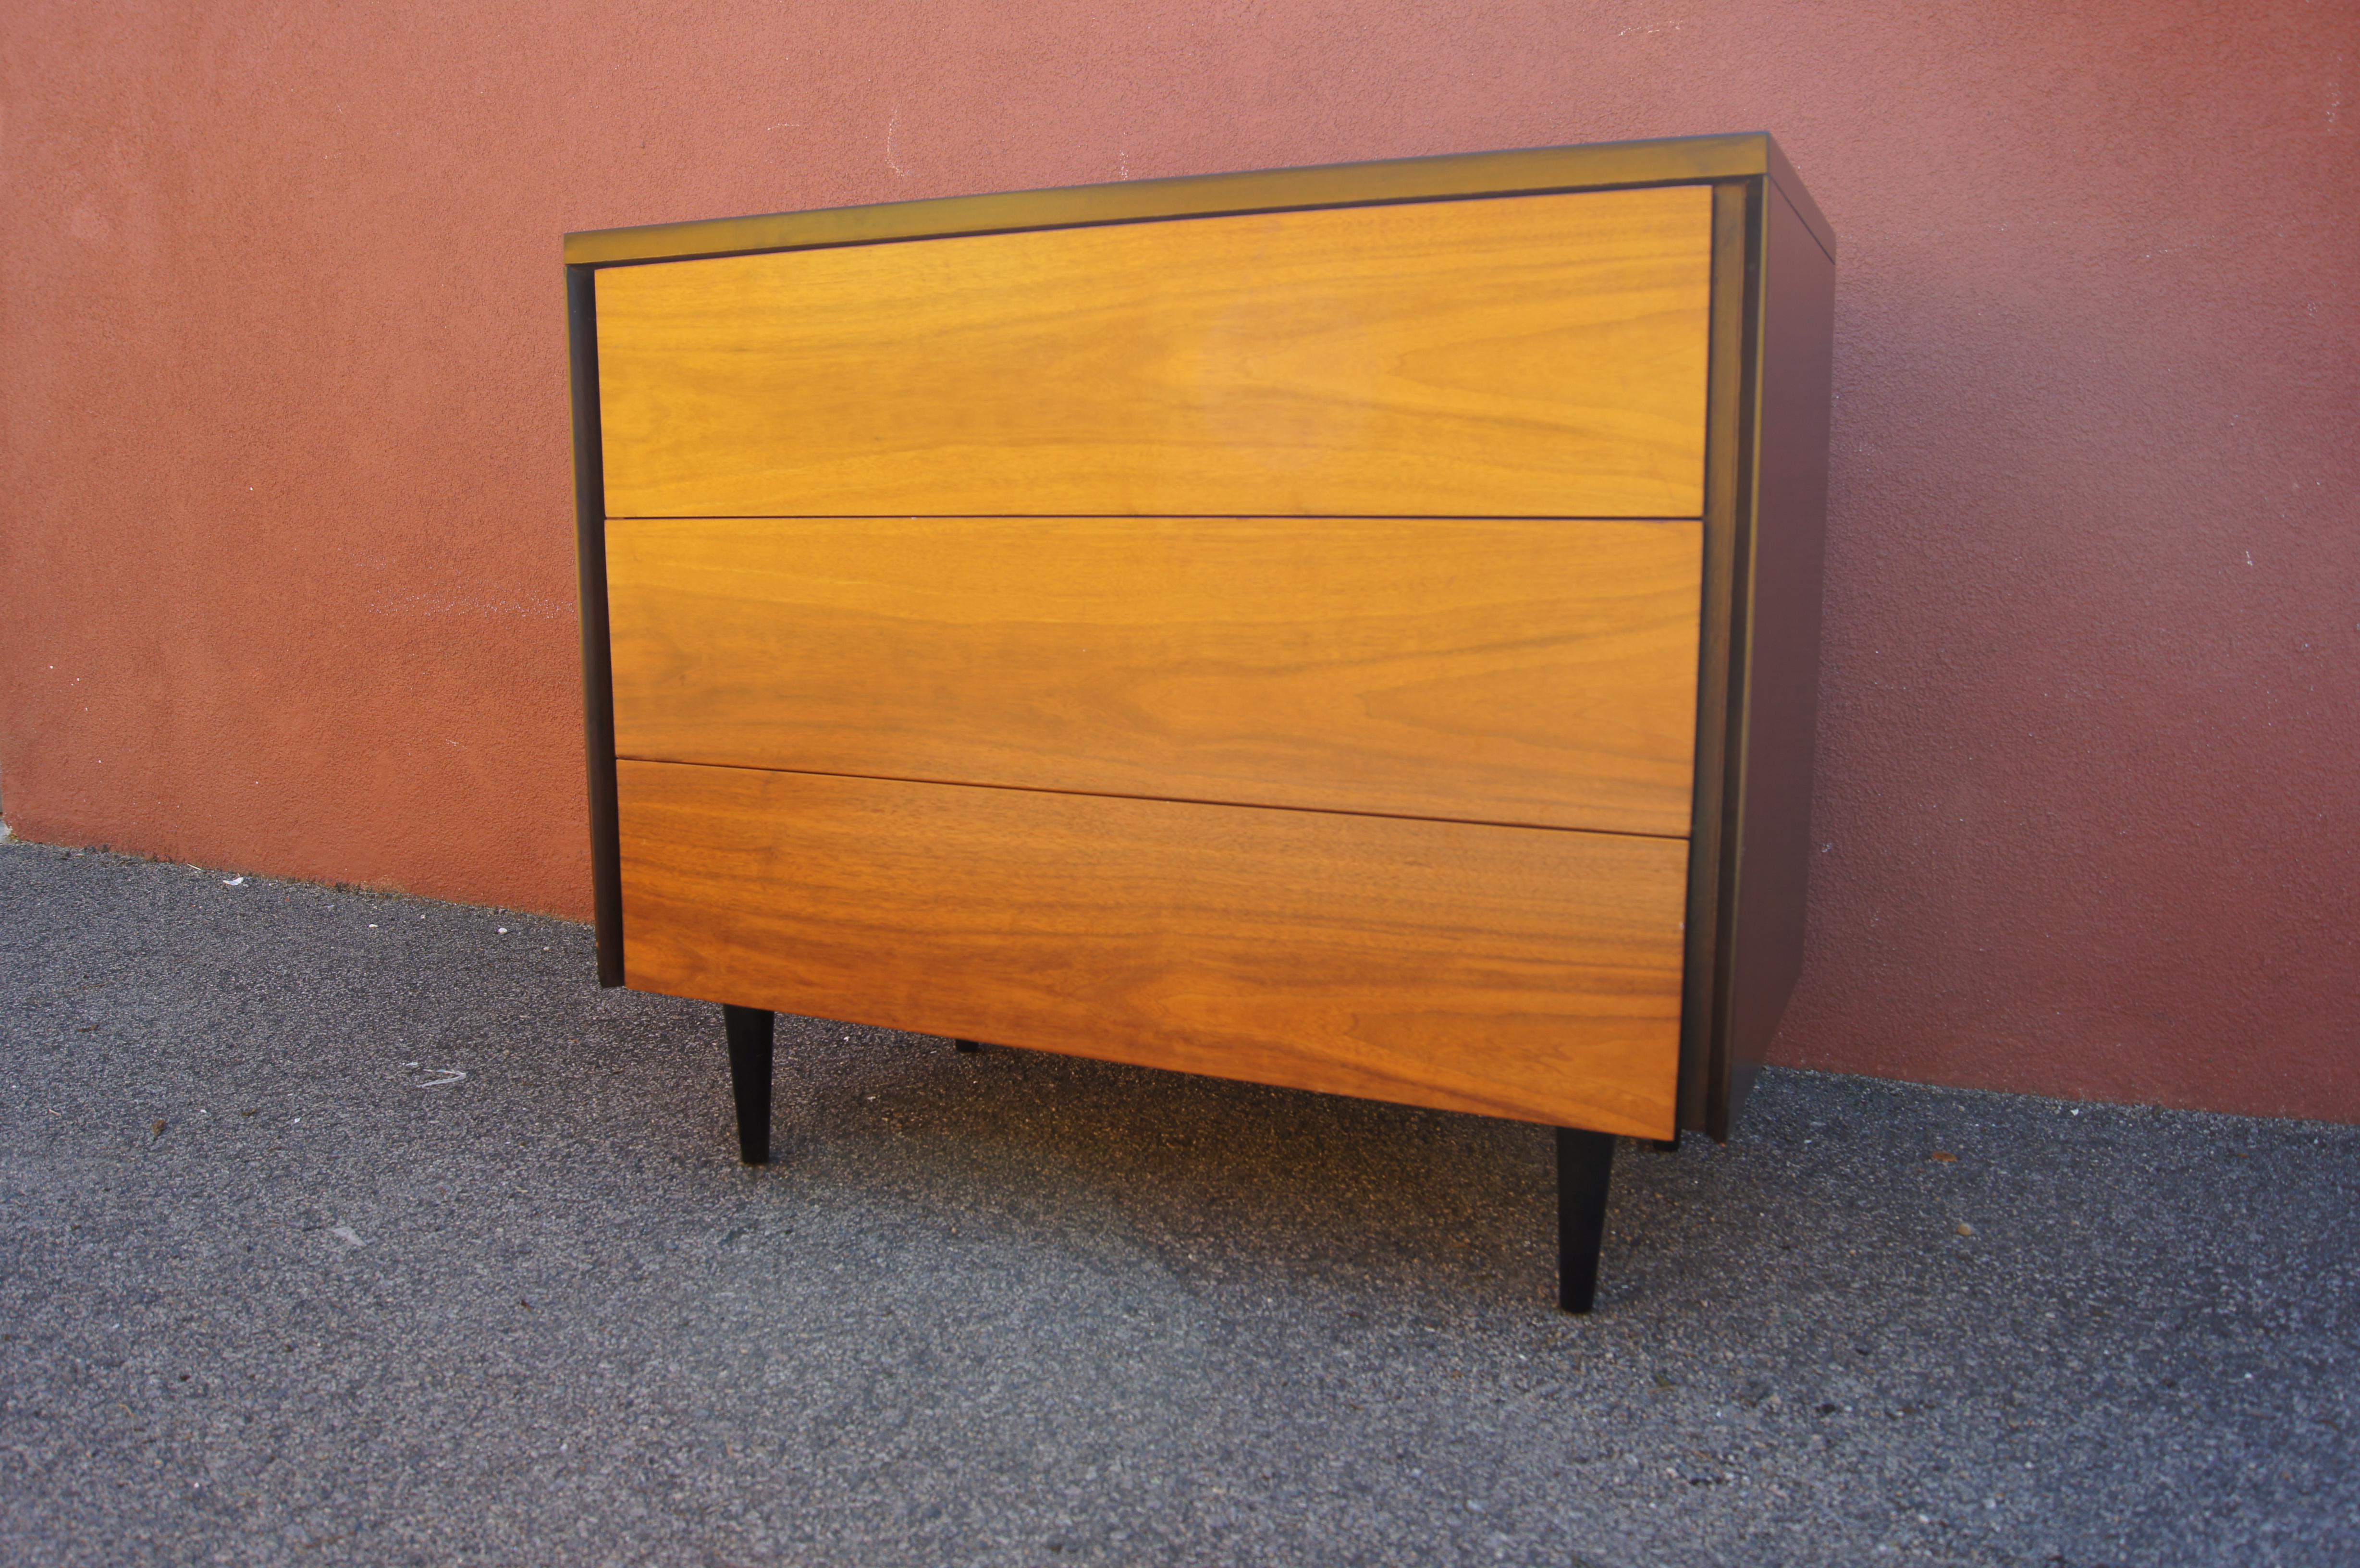 This midcentury three-drawer dresser features a walnut case on tapered black-painted metal legs. The drawer are recessed within the frame and their integral pulls reached at the sides, creating a clean front.

No maker's mark.